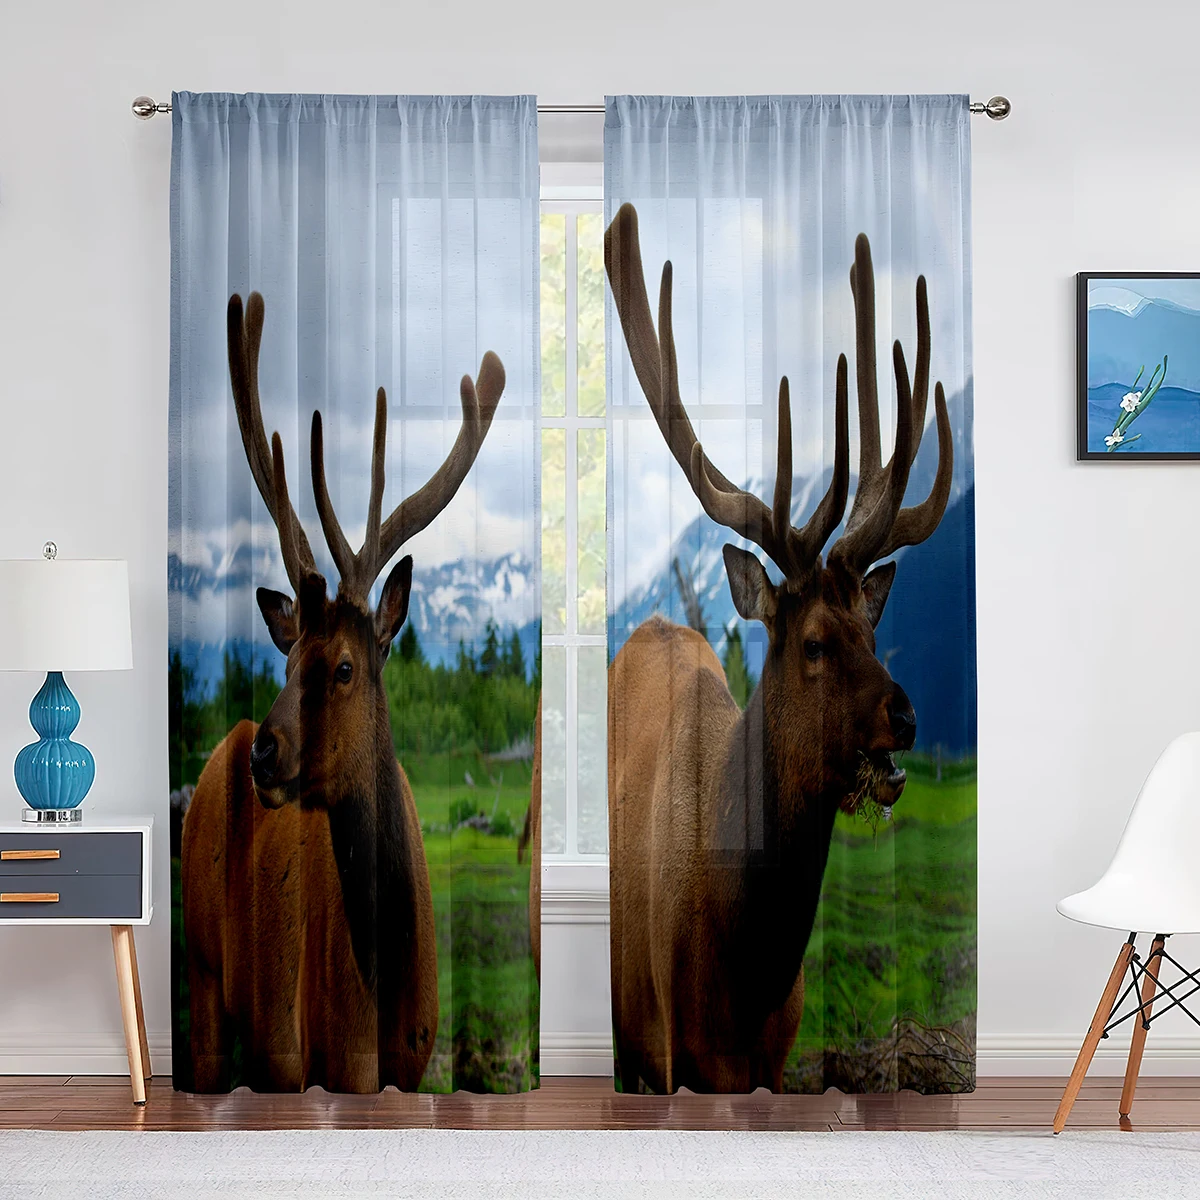 

Deer In The Mountain Sheer Curtains for Living Room Decor Wild Animals Hunting Window Curtain Bedroom Kitchen Tulle Voile Drapes